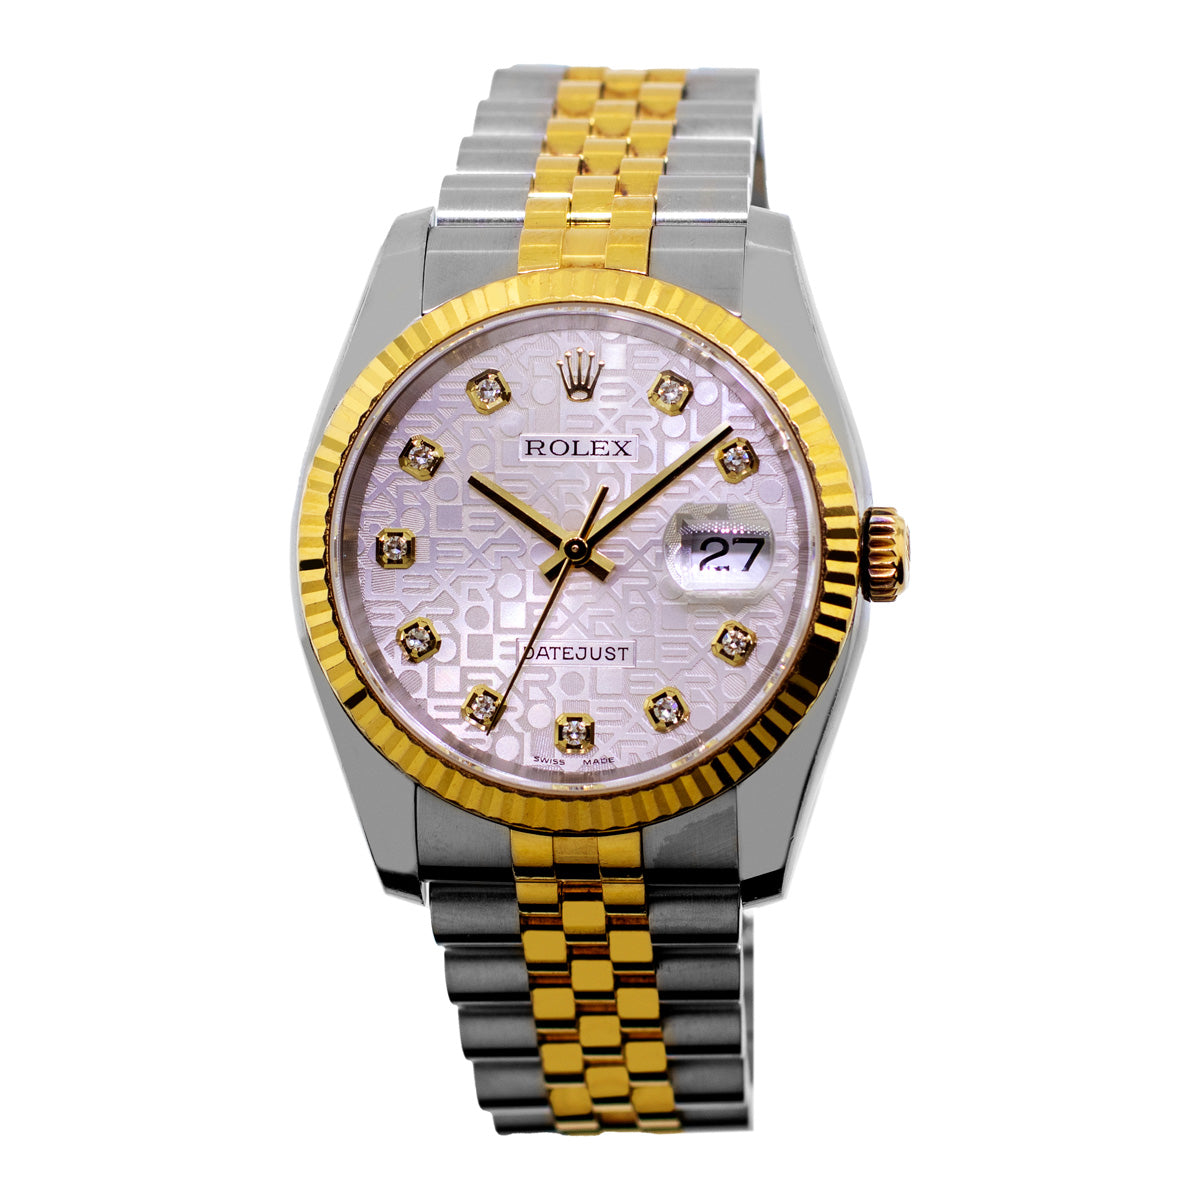 Rolex Datejust 36mm Jubilee 116233 Stainless Steel & Yellow Gold Watch  White Diamond Dial